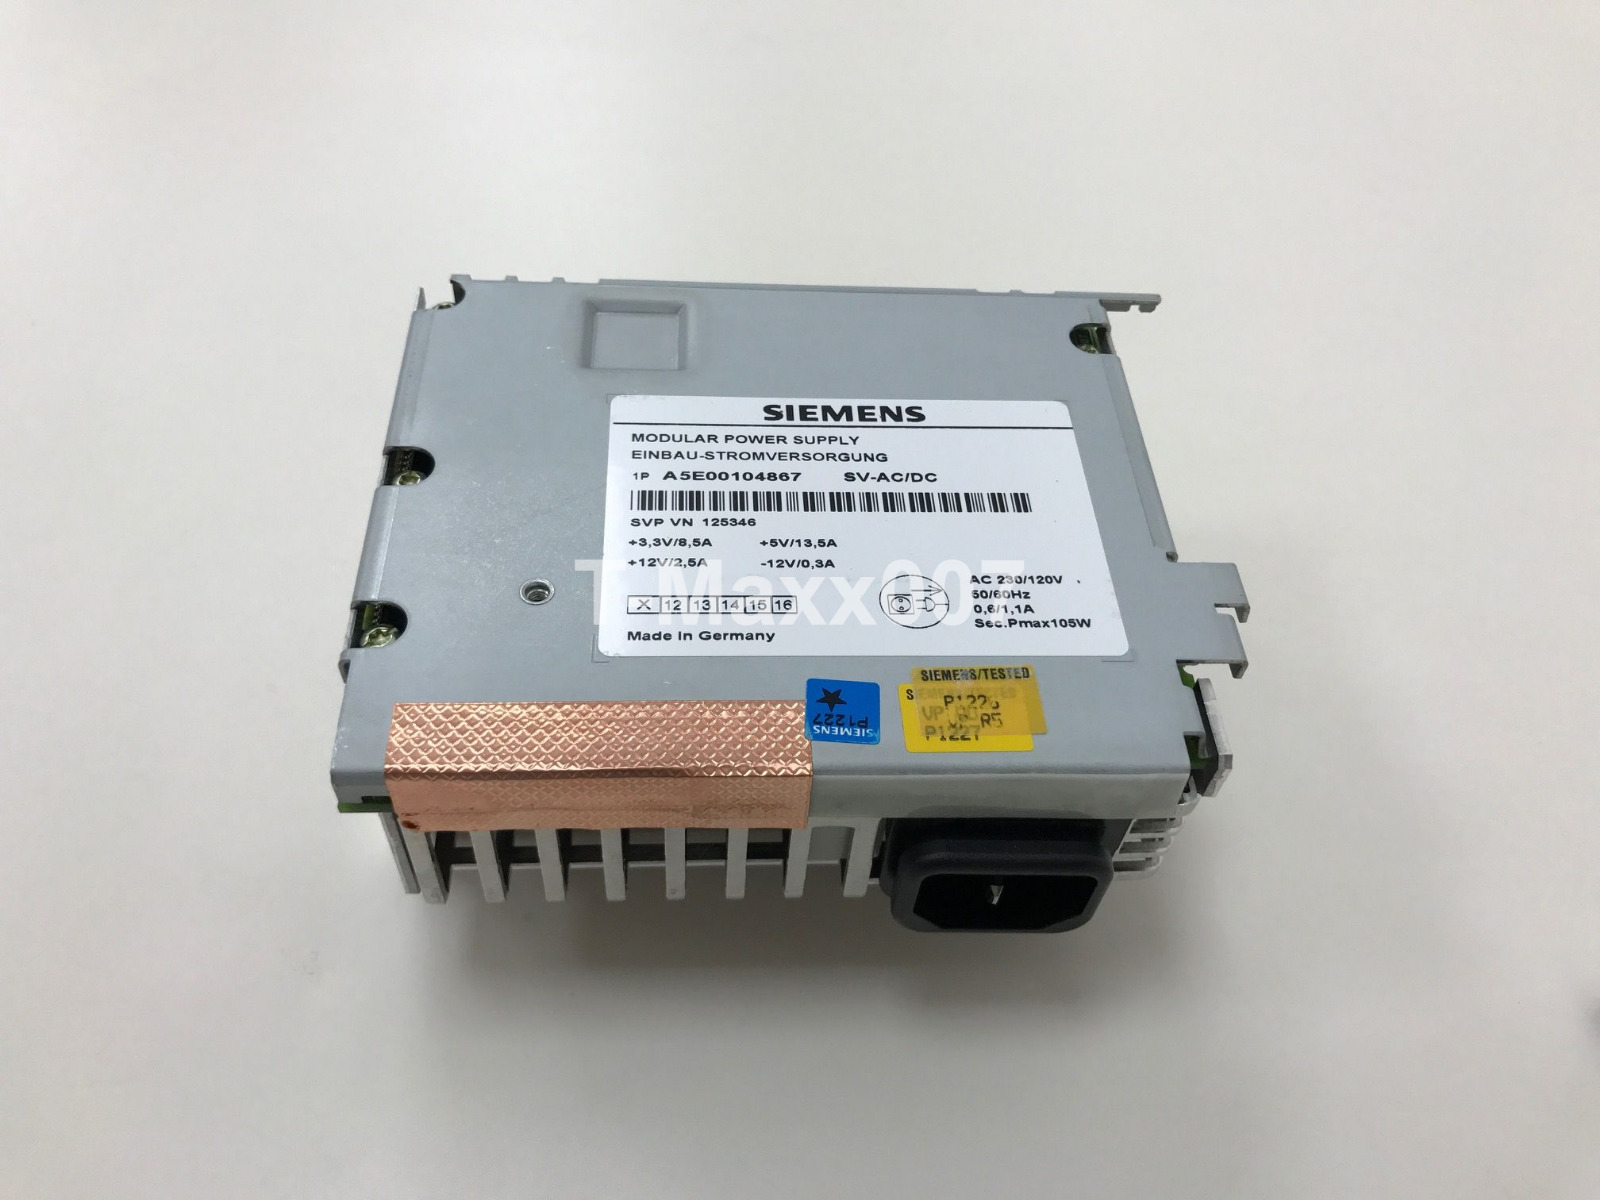 Siemens Modular Power Supply A5E00104867 Fully Tested Fast Shipping